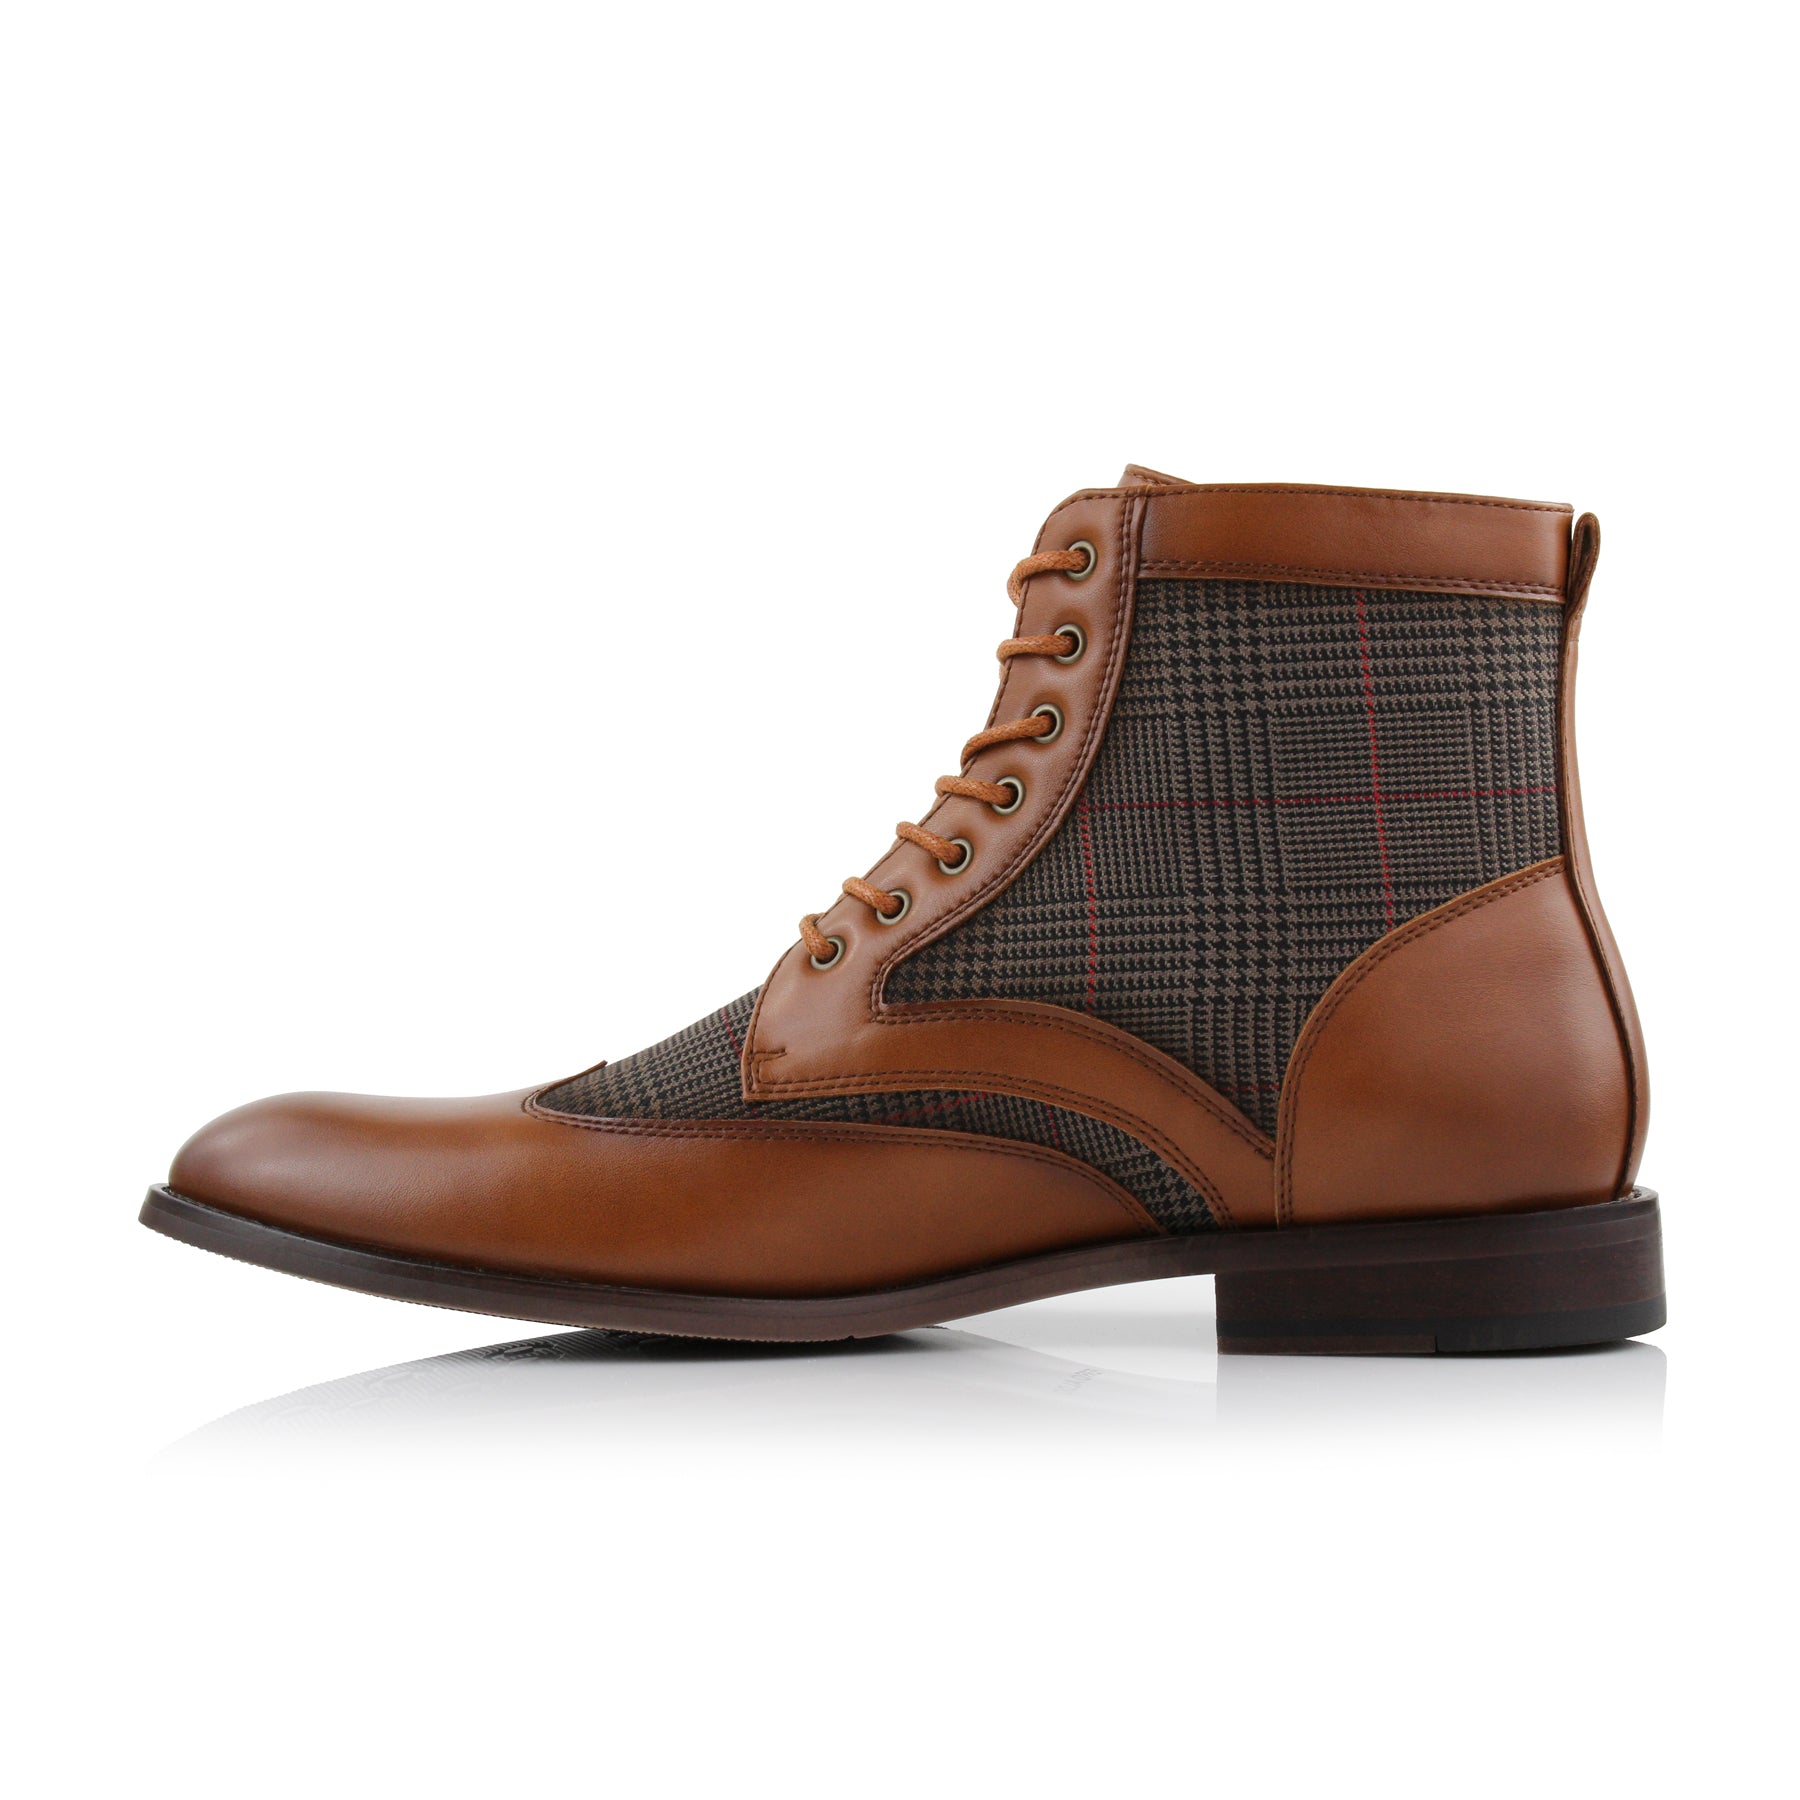 Plaid Wingtip Boots | Gideon by Ferro Aldo | Conal Footwear | Inner Side Angle View